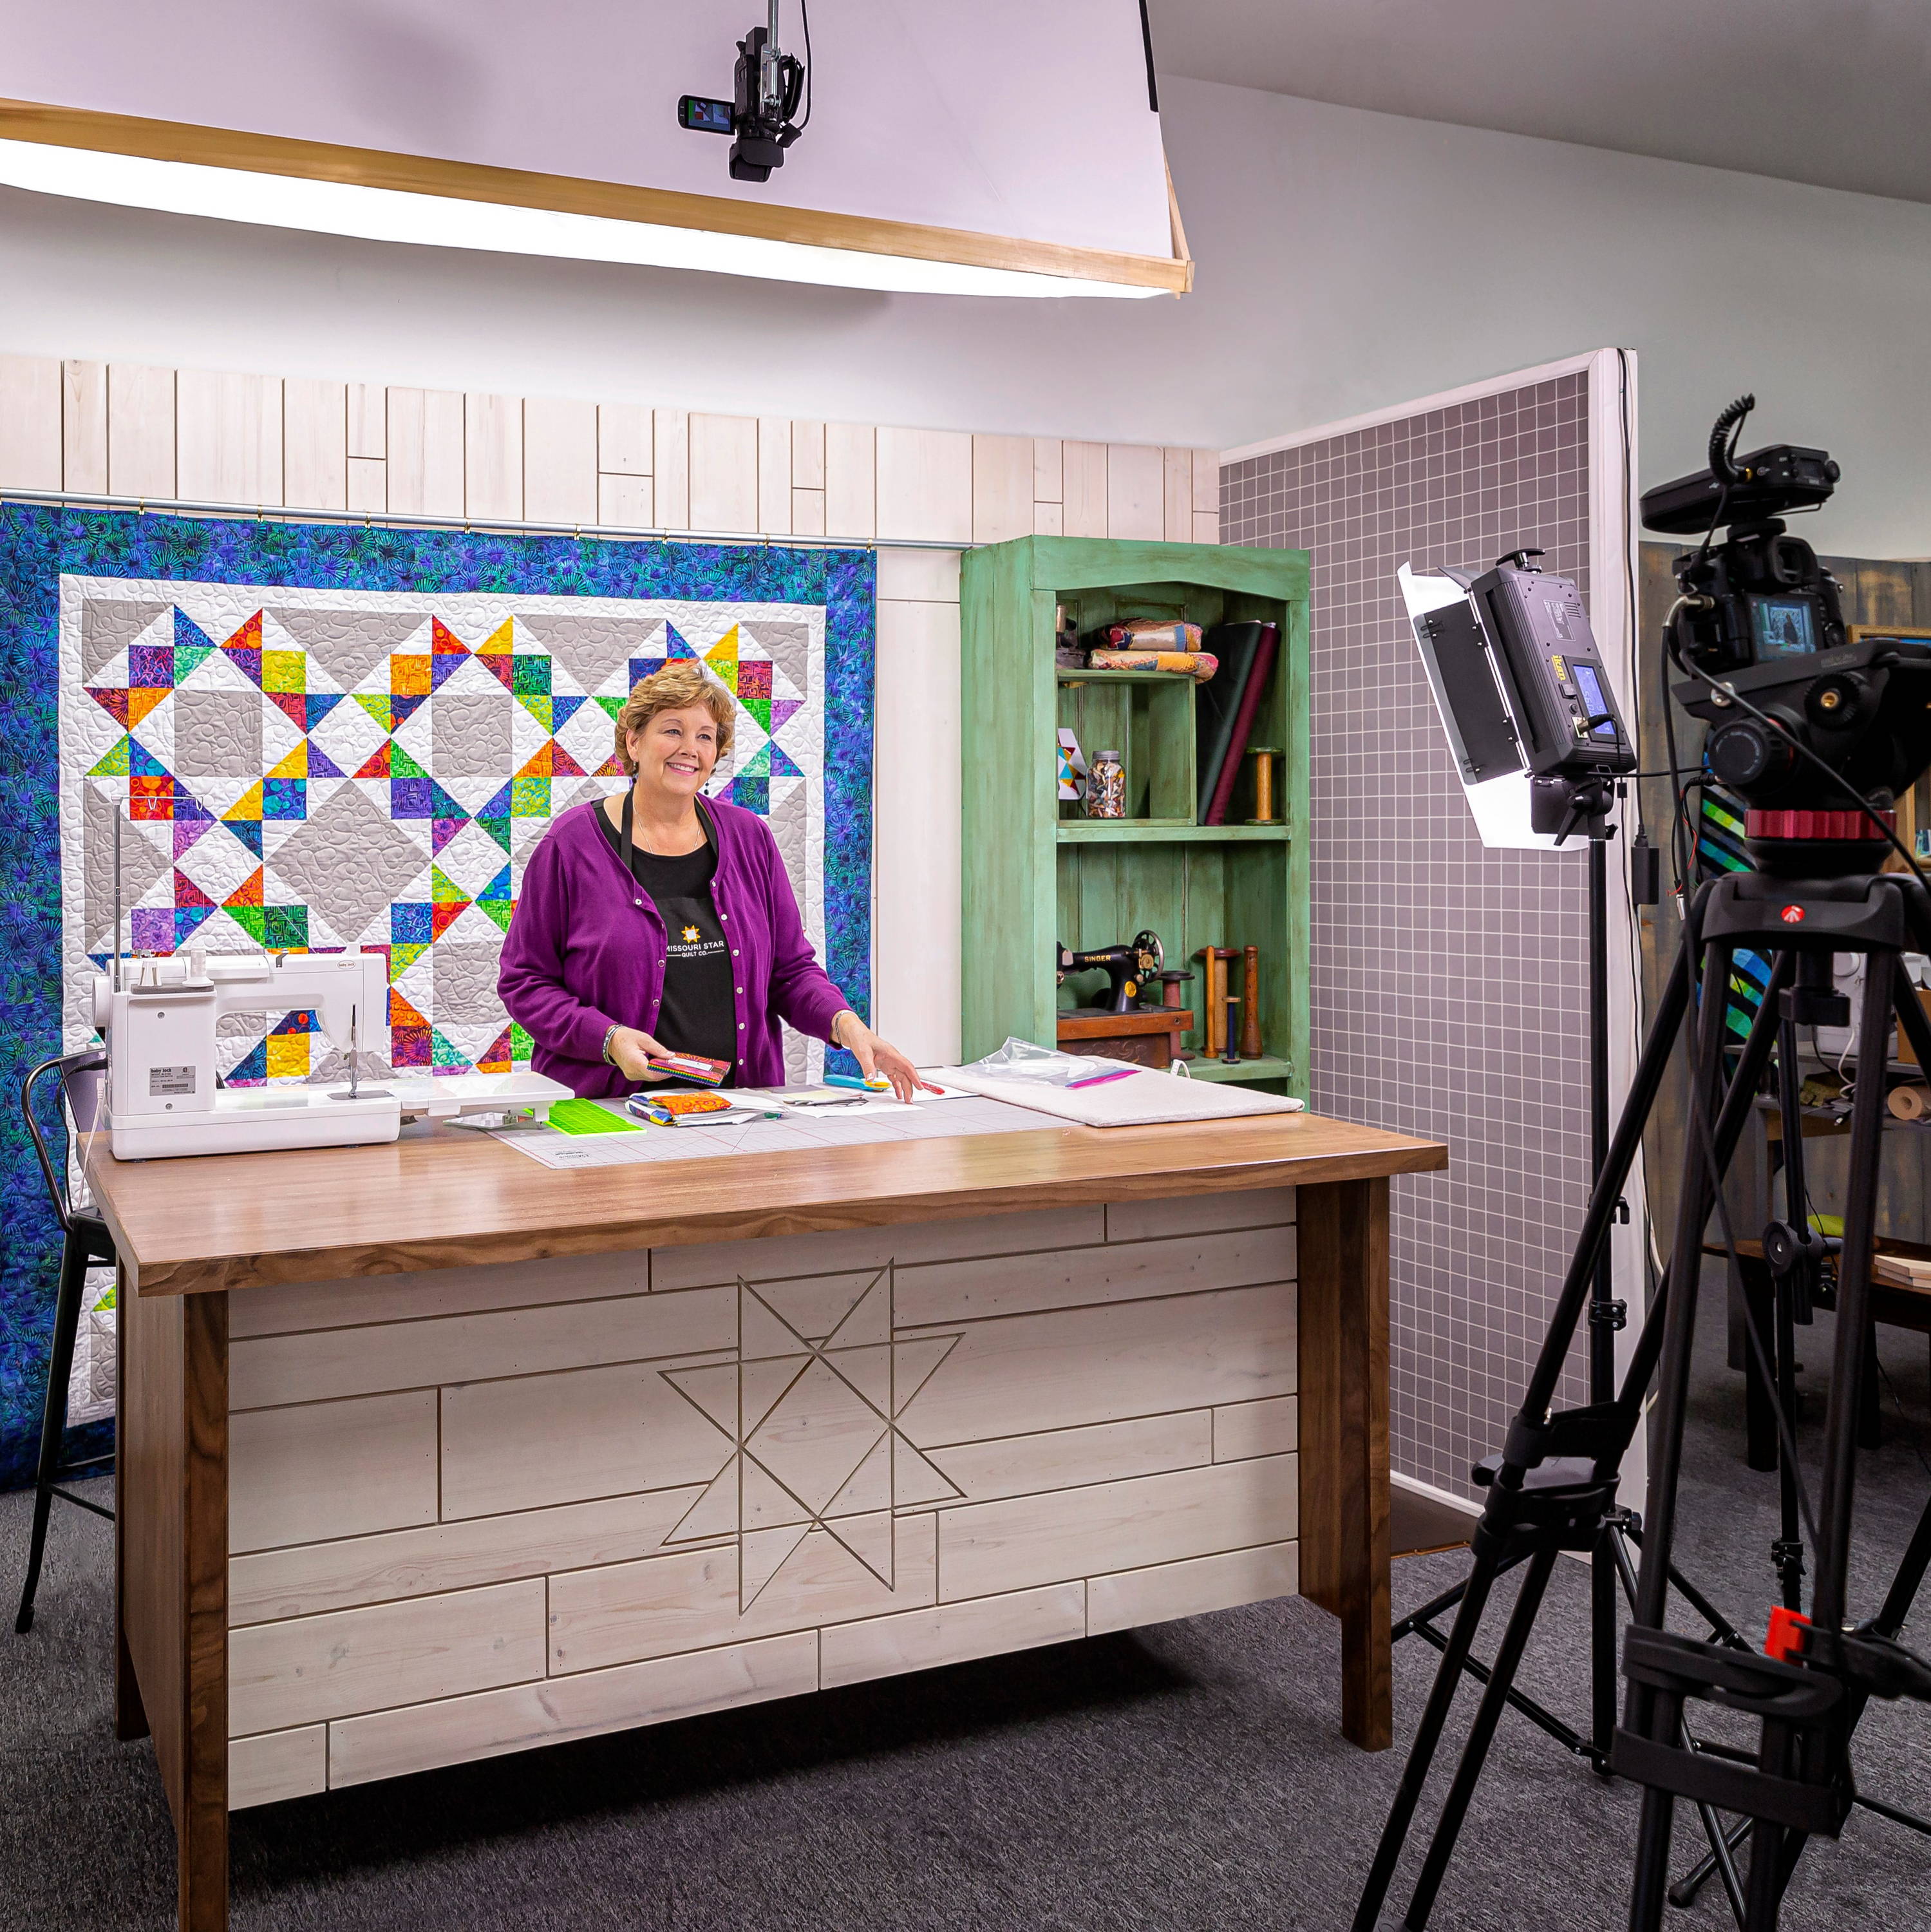 Jenny filming an online quilting tutorial for YouTube